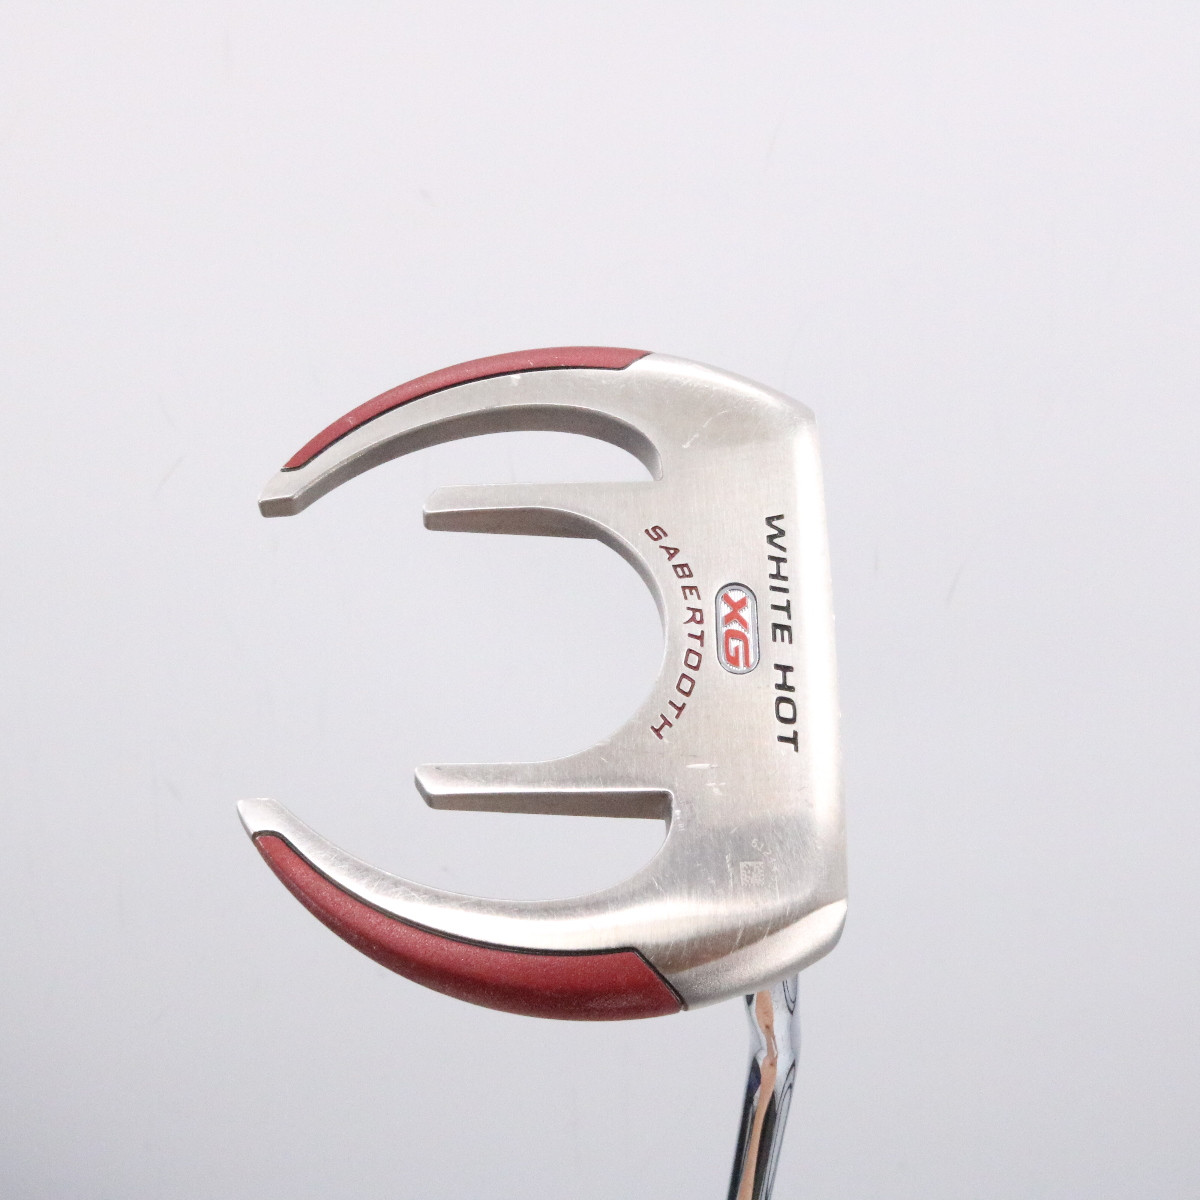 odyssey white hot putter headcover